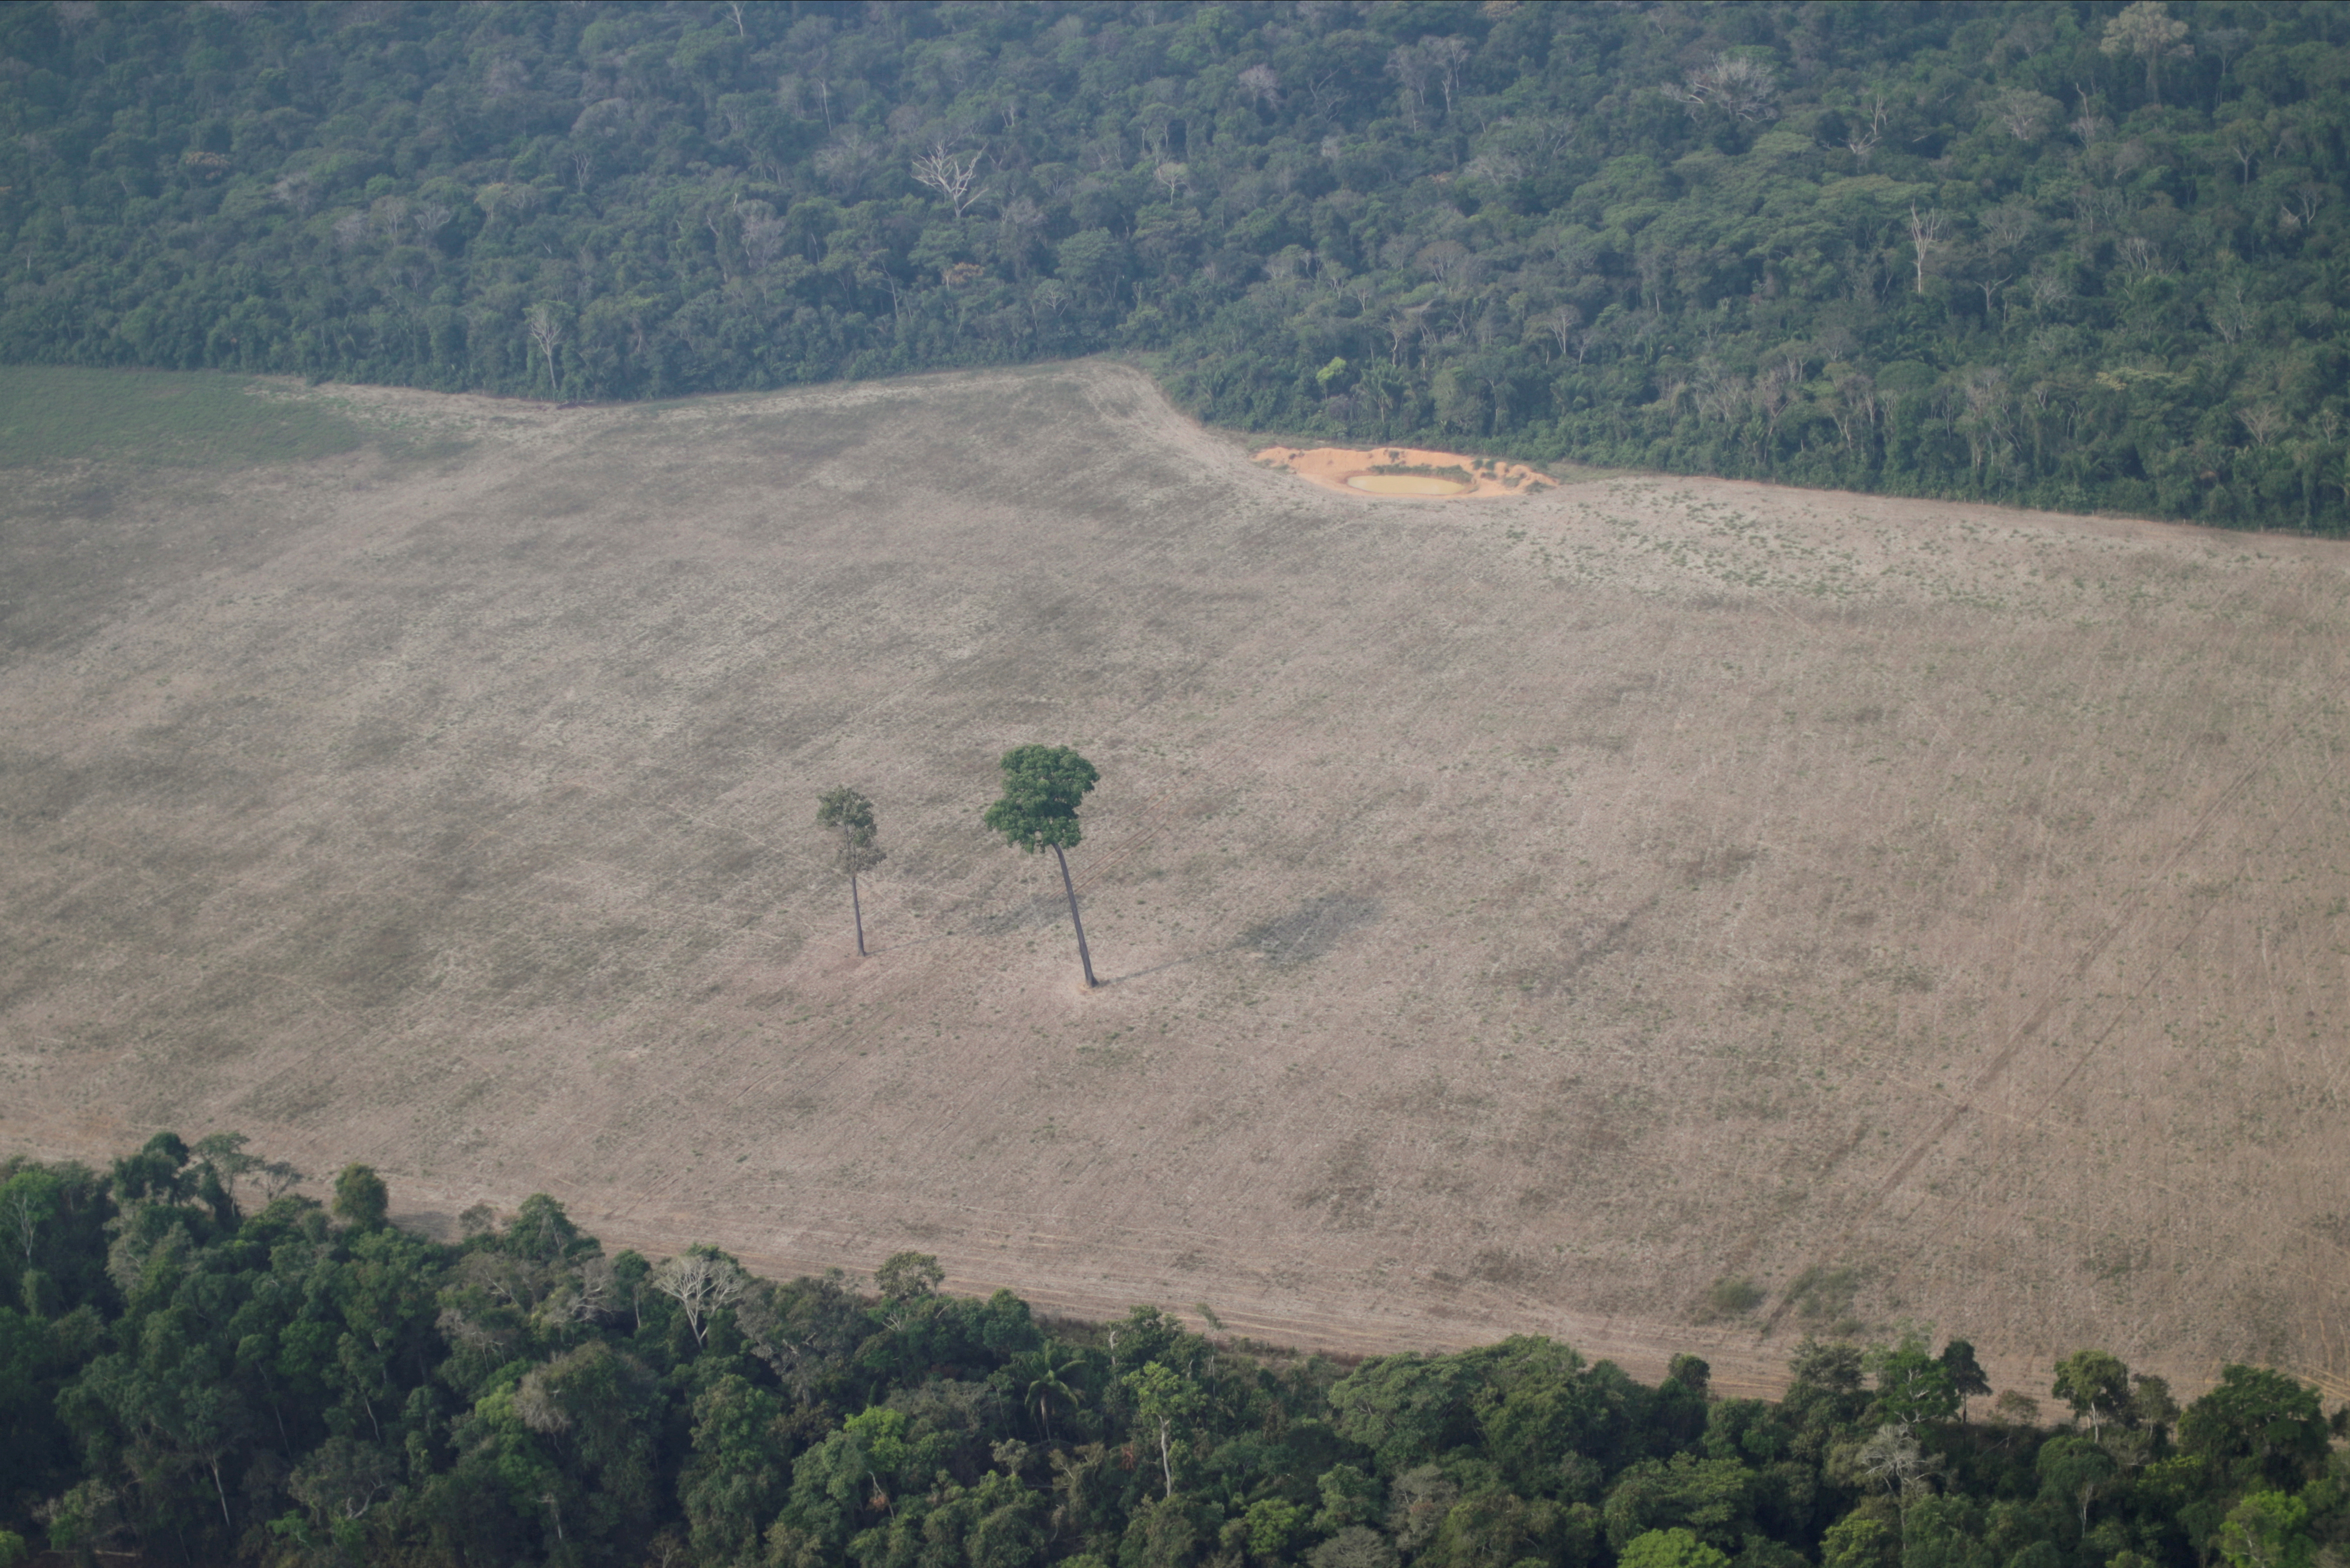 An aerial view shows a tree at the center of a deforested plot of the Amazon near Porto Velho, Rondonia State